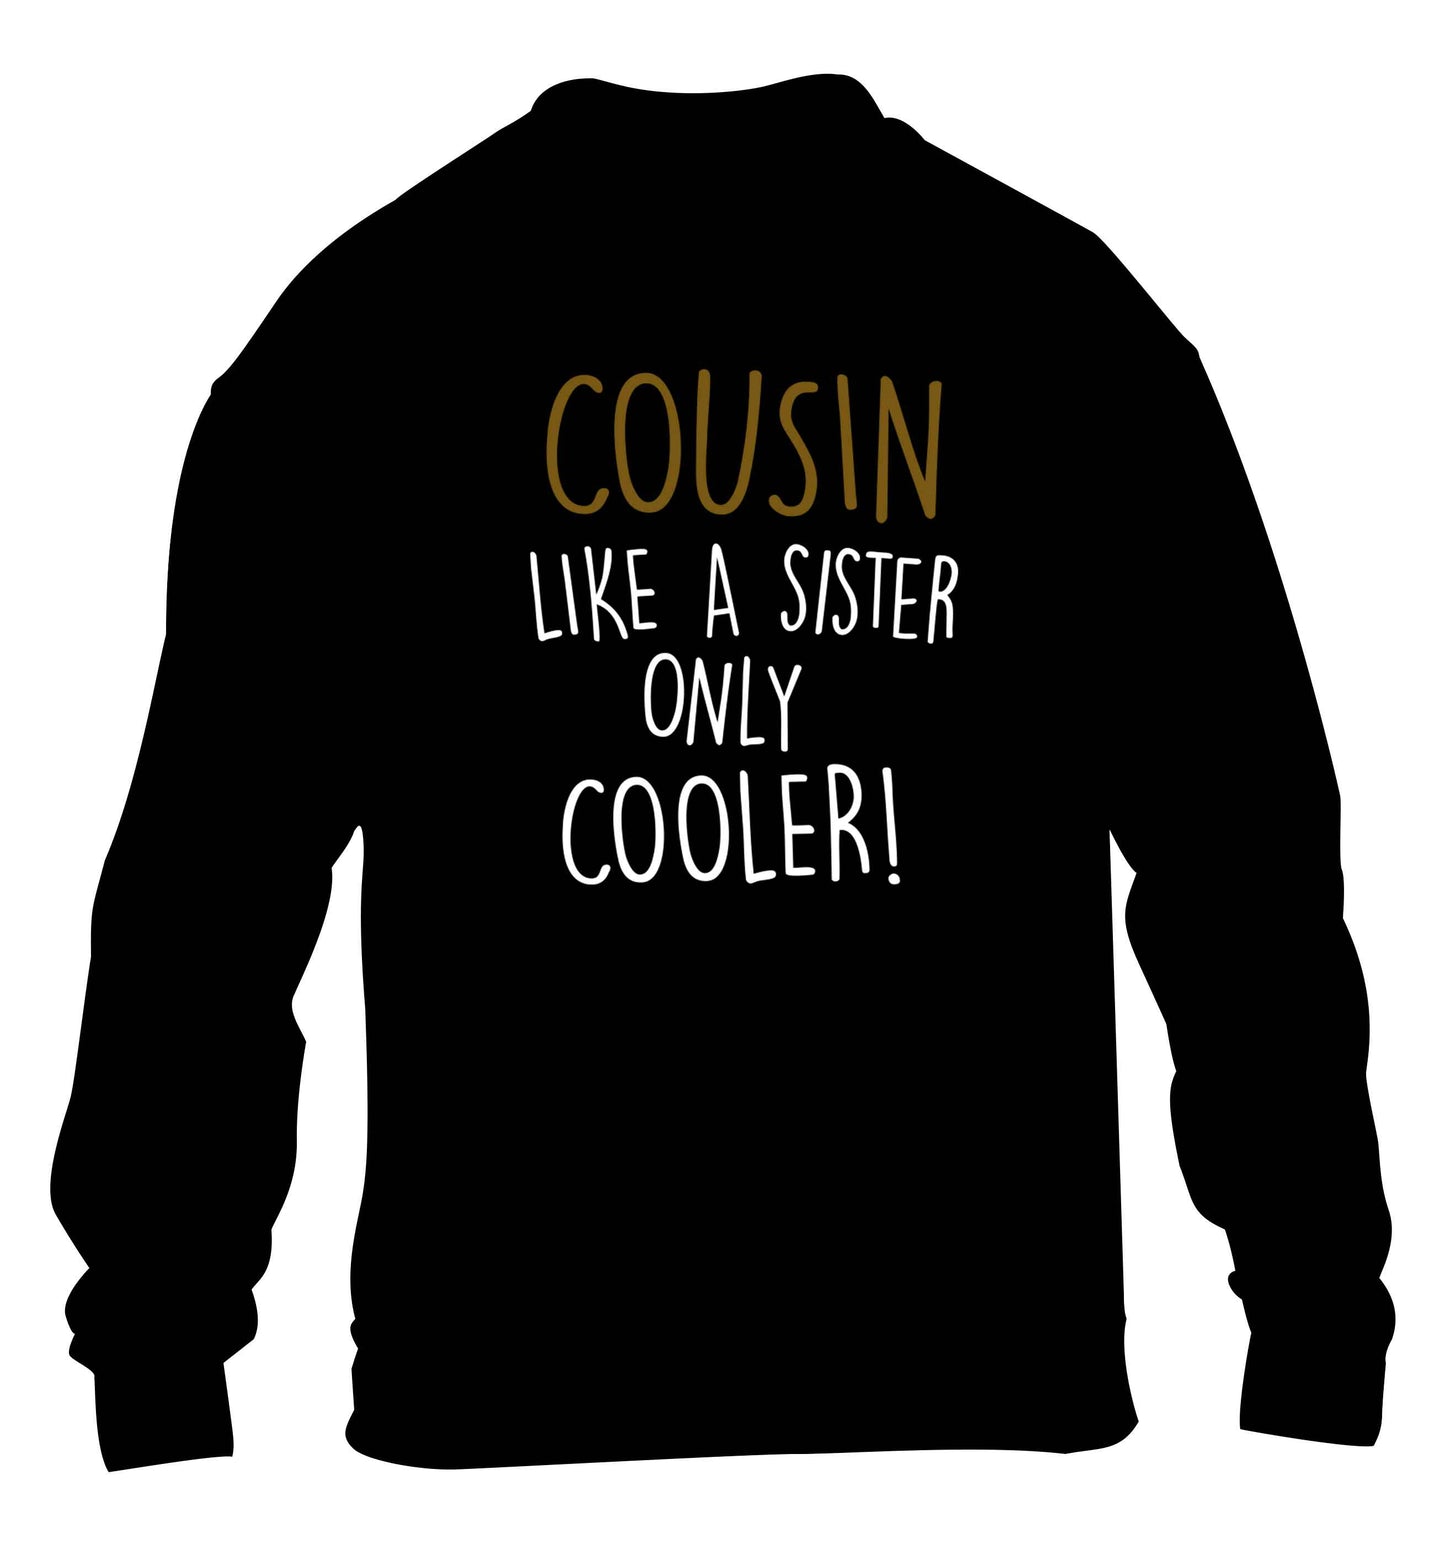 Cousin like a sister only cooler children's black sweater 12-13 Years